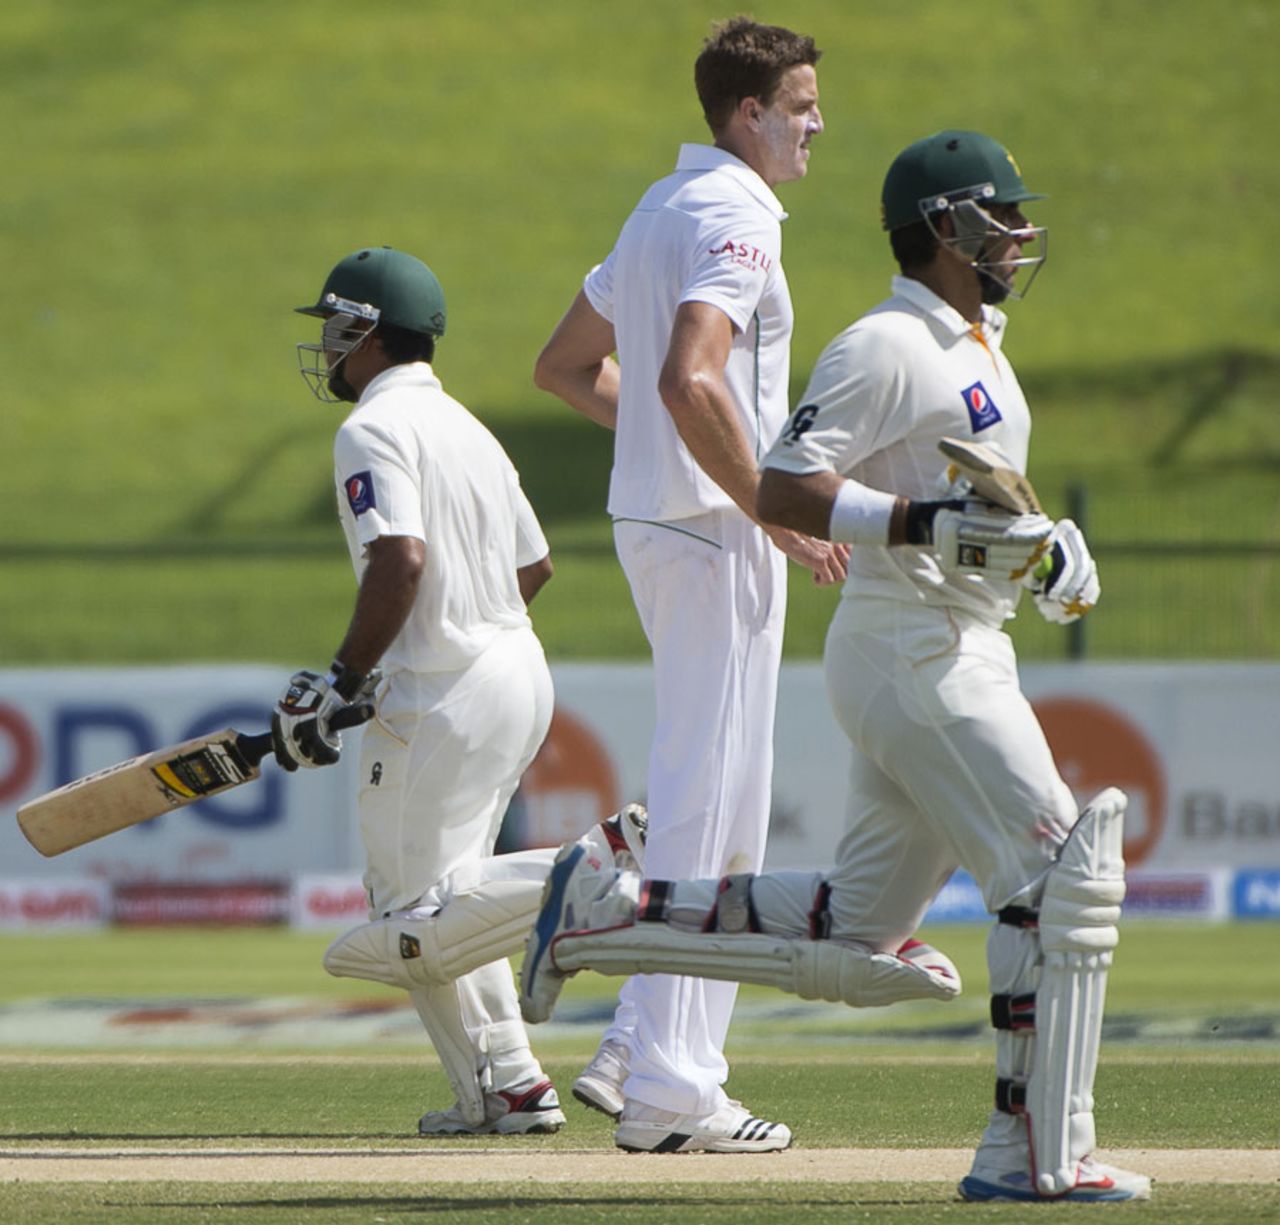 Misbah-ul-Haq and Asad Shafiq take a single as Morne Morkel looks on, Pakistan v South Africa, 1st Test, 3rd day, Abu Dhabi, October 16, 2013